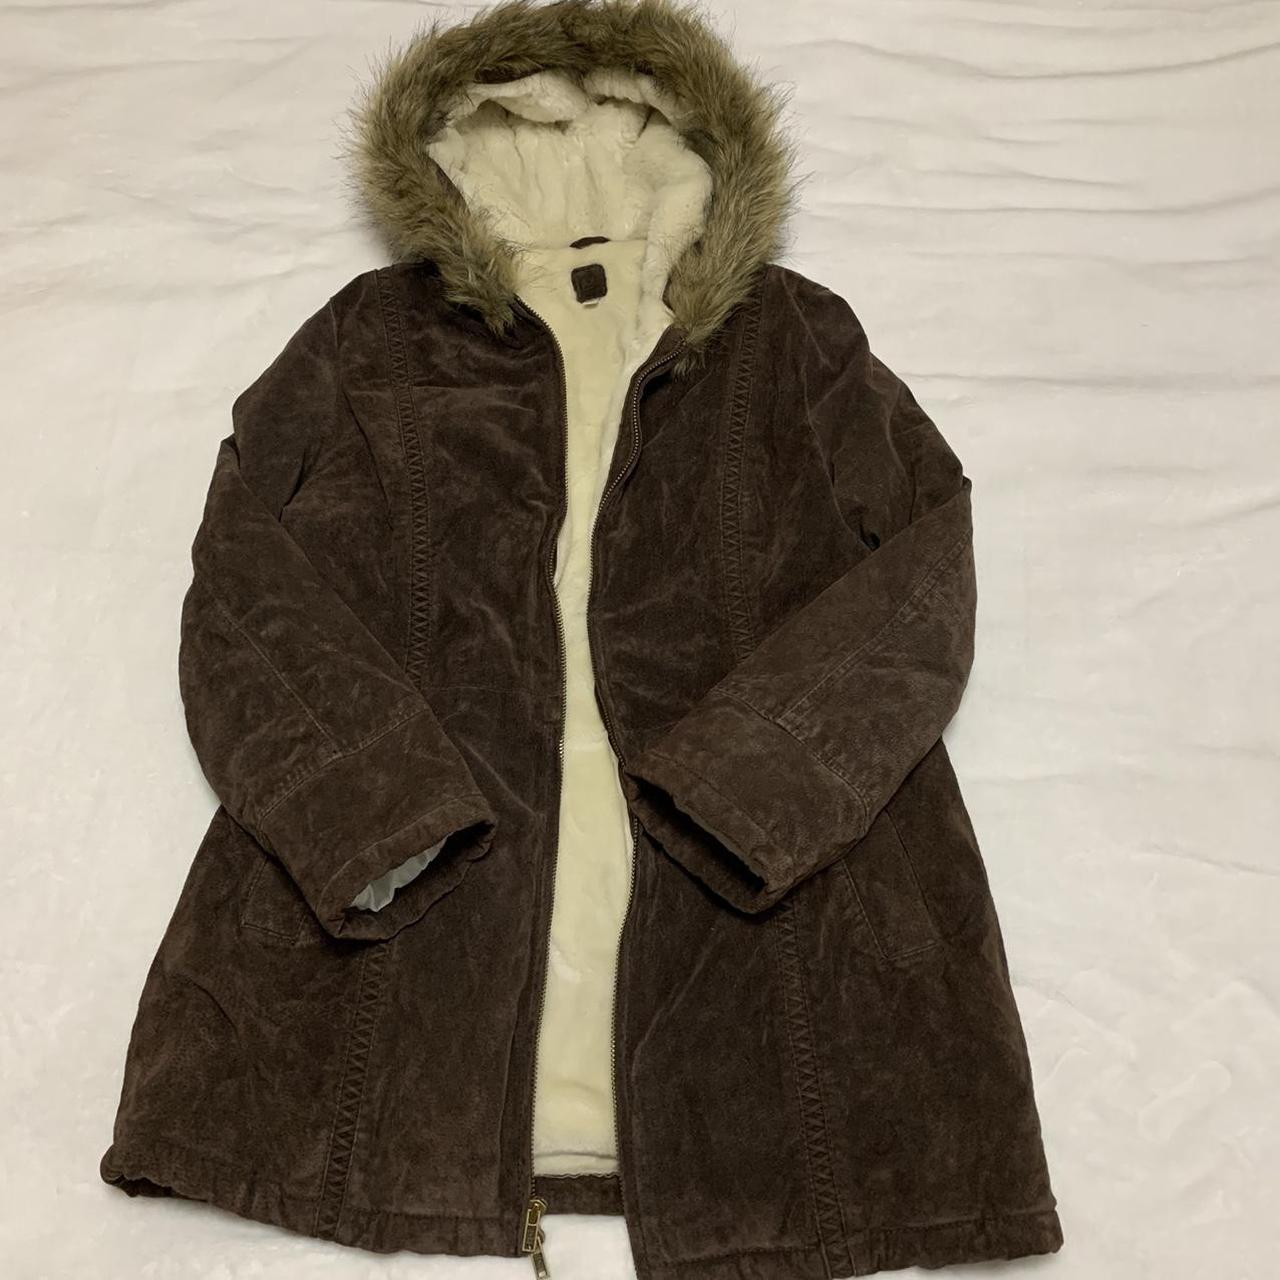 Product Image 3 - Vintage suede faux fur jacket

-from